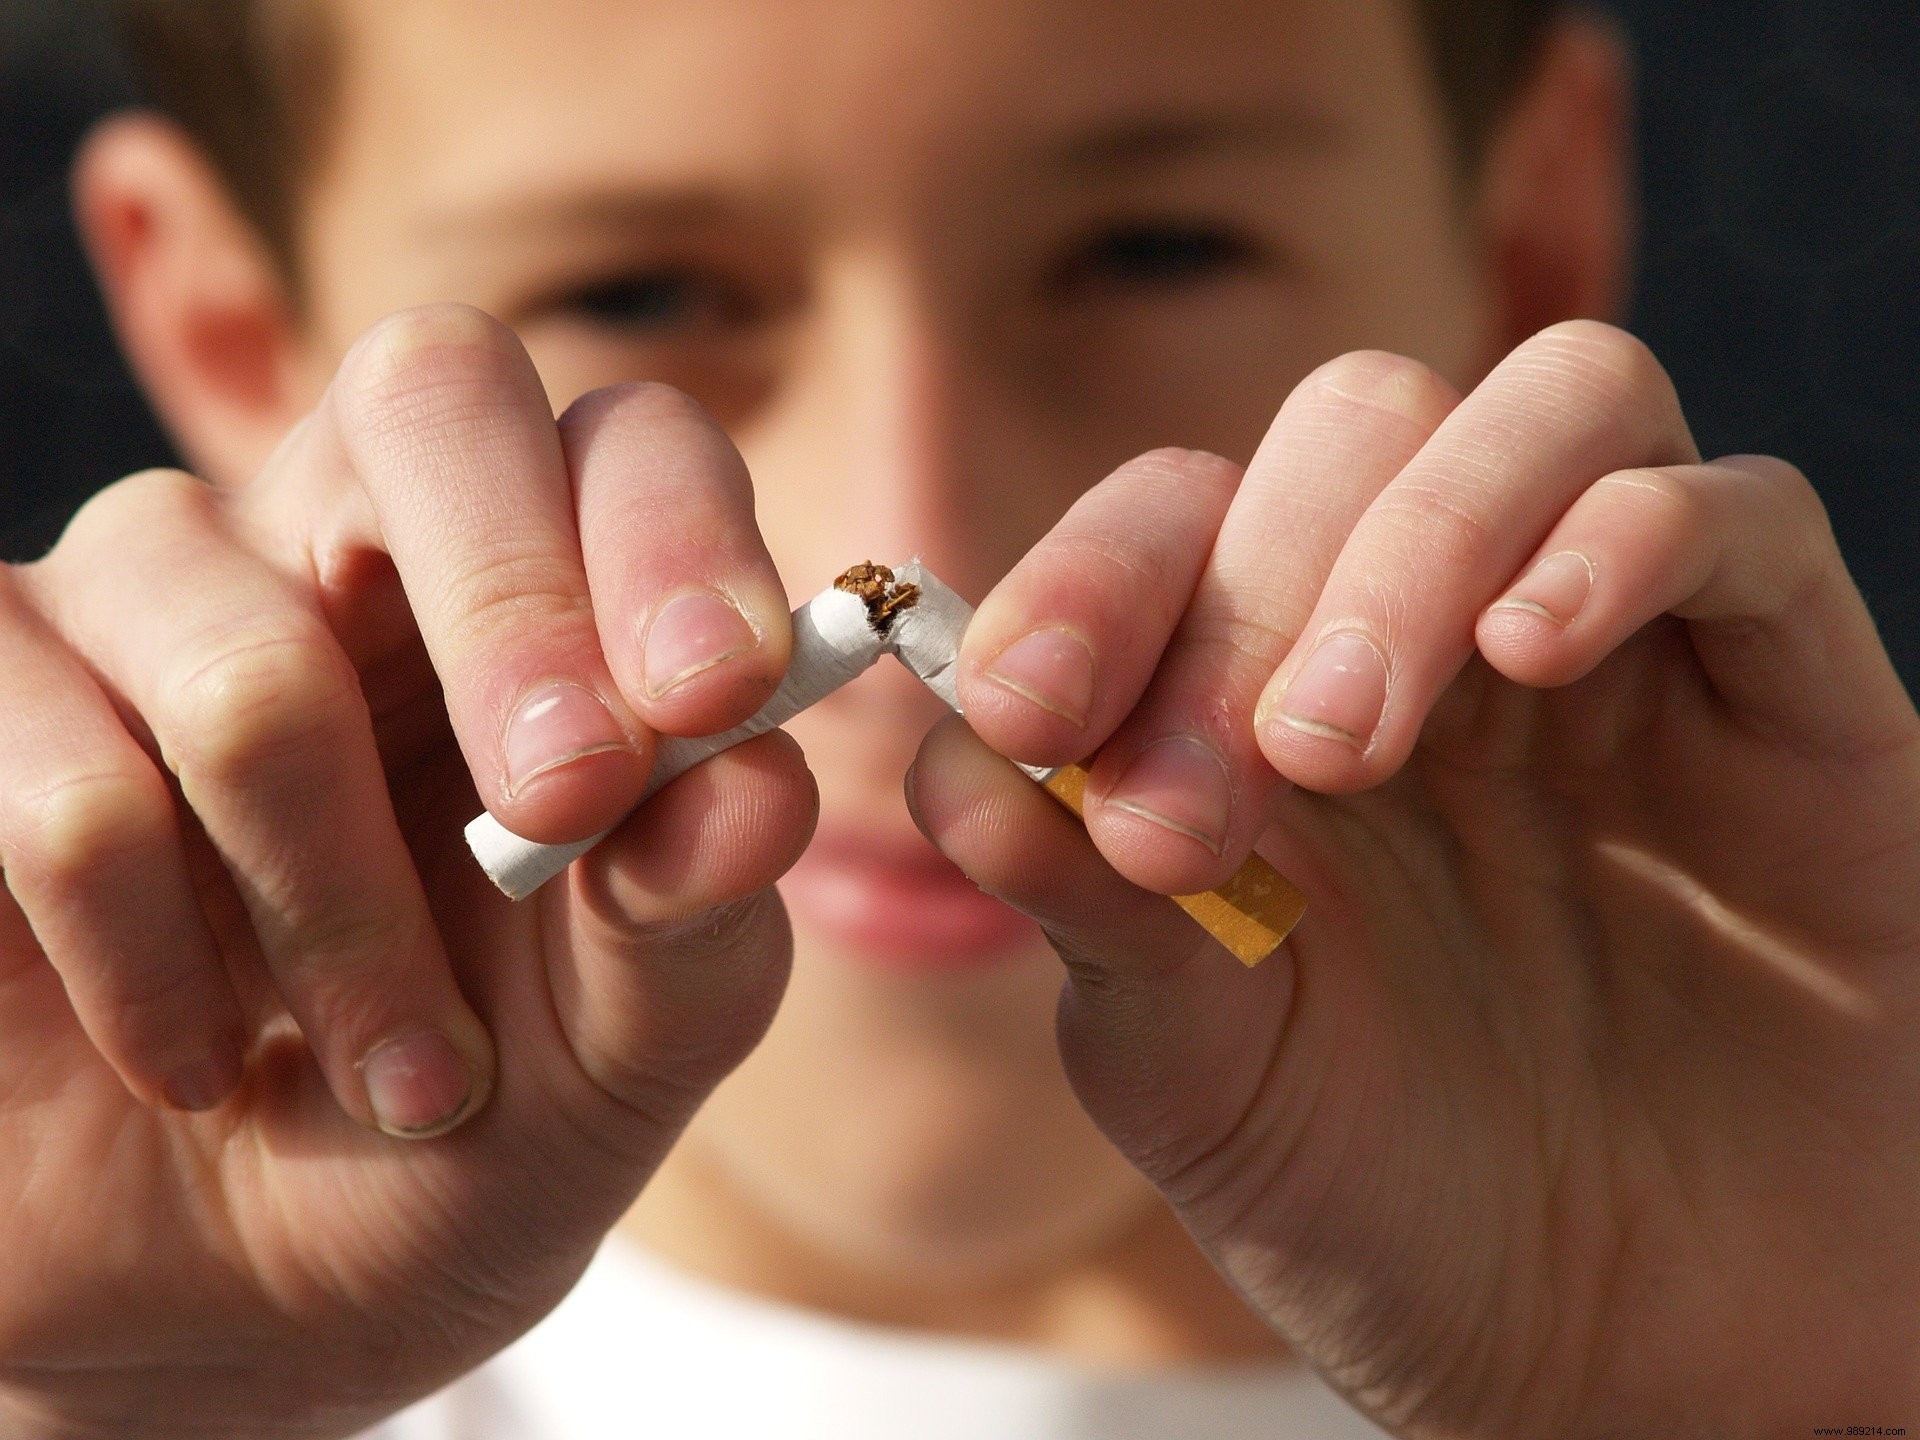 New Zealand will ban smoking for anyone born after 2008 